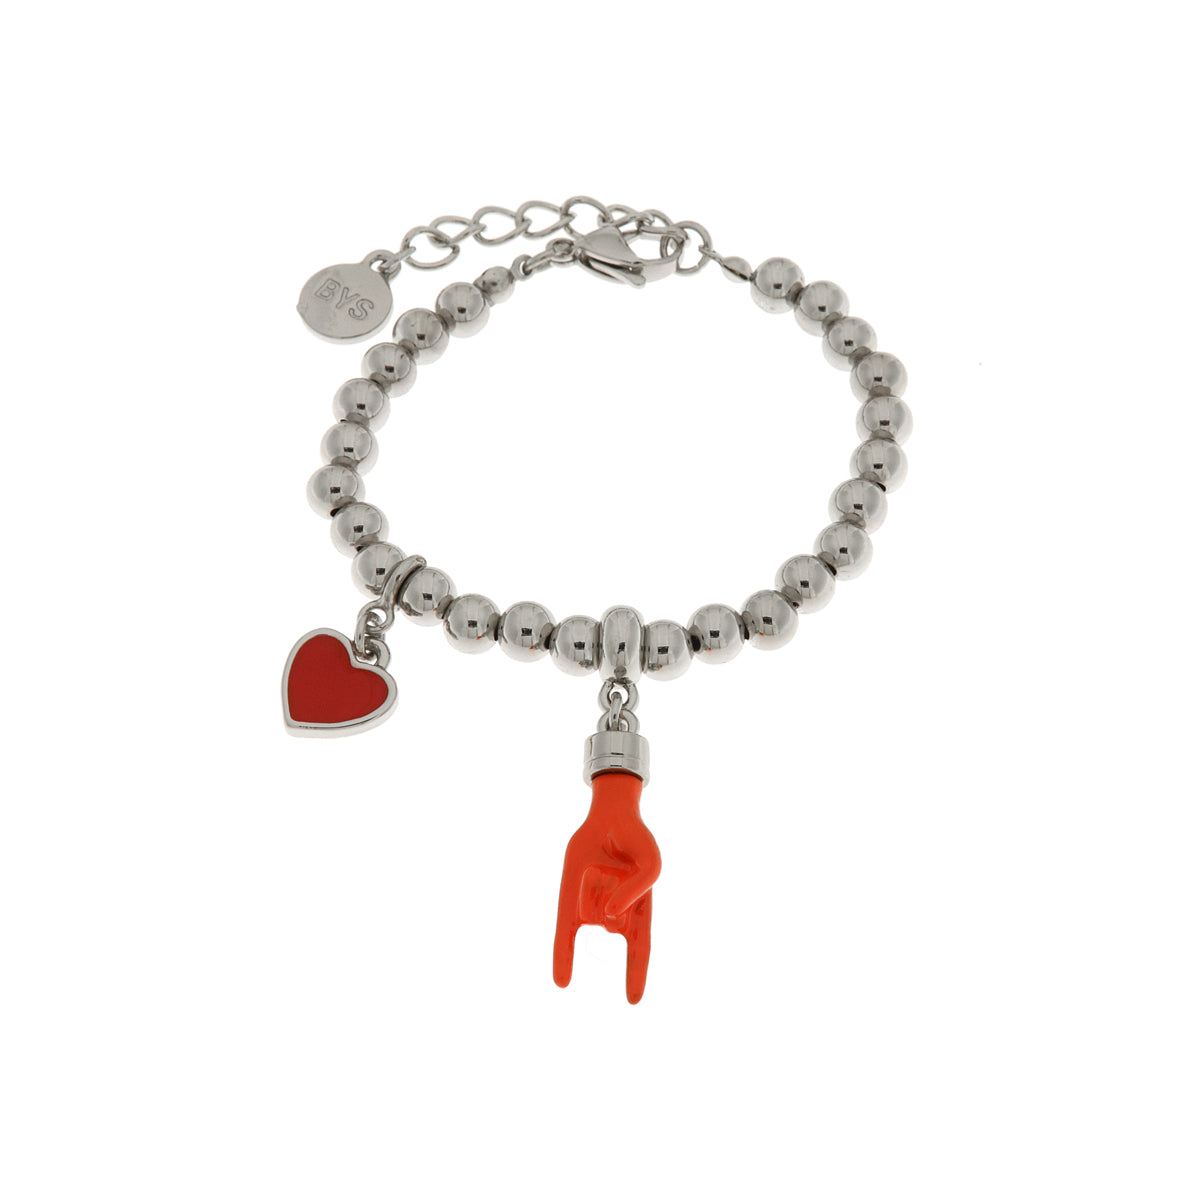 Metal bracelet with horns in the shape of a horns brings luck and red heart